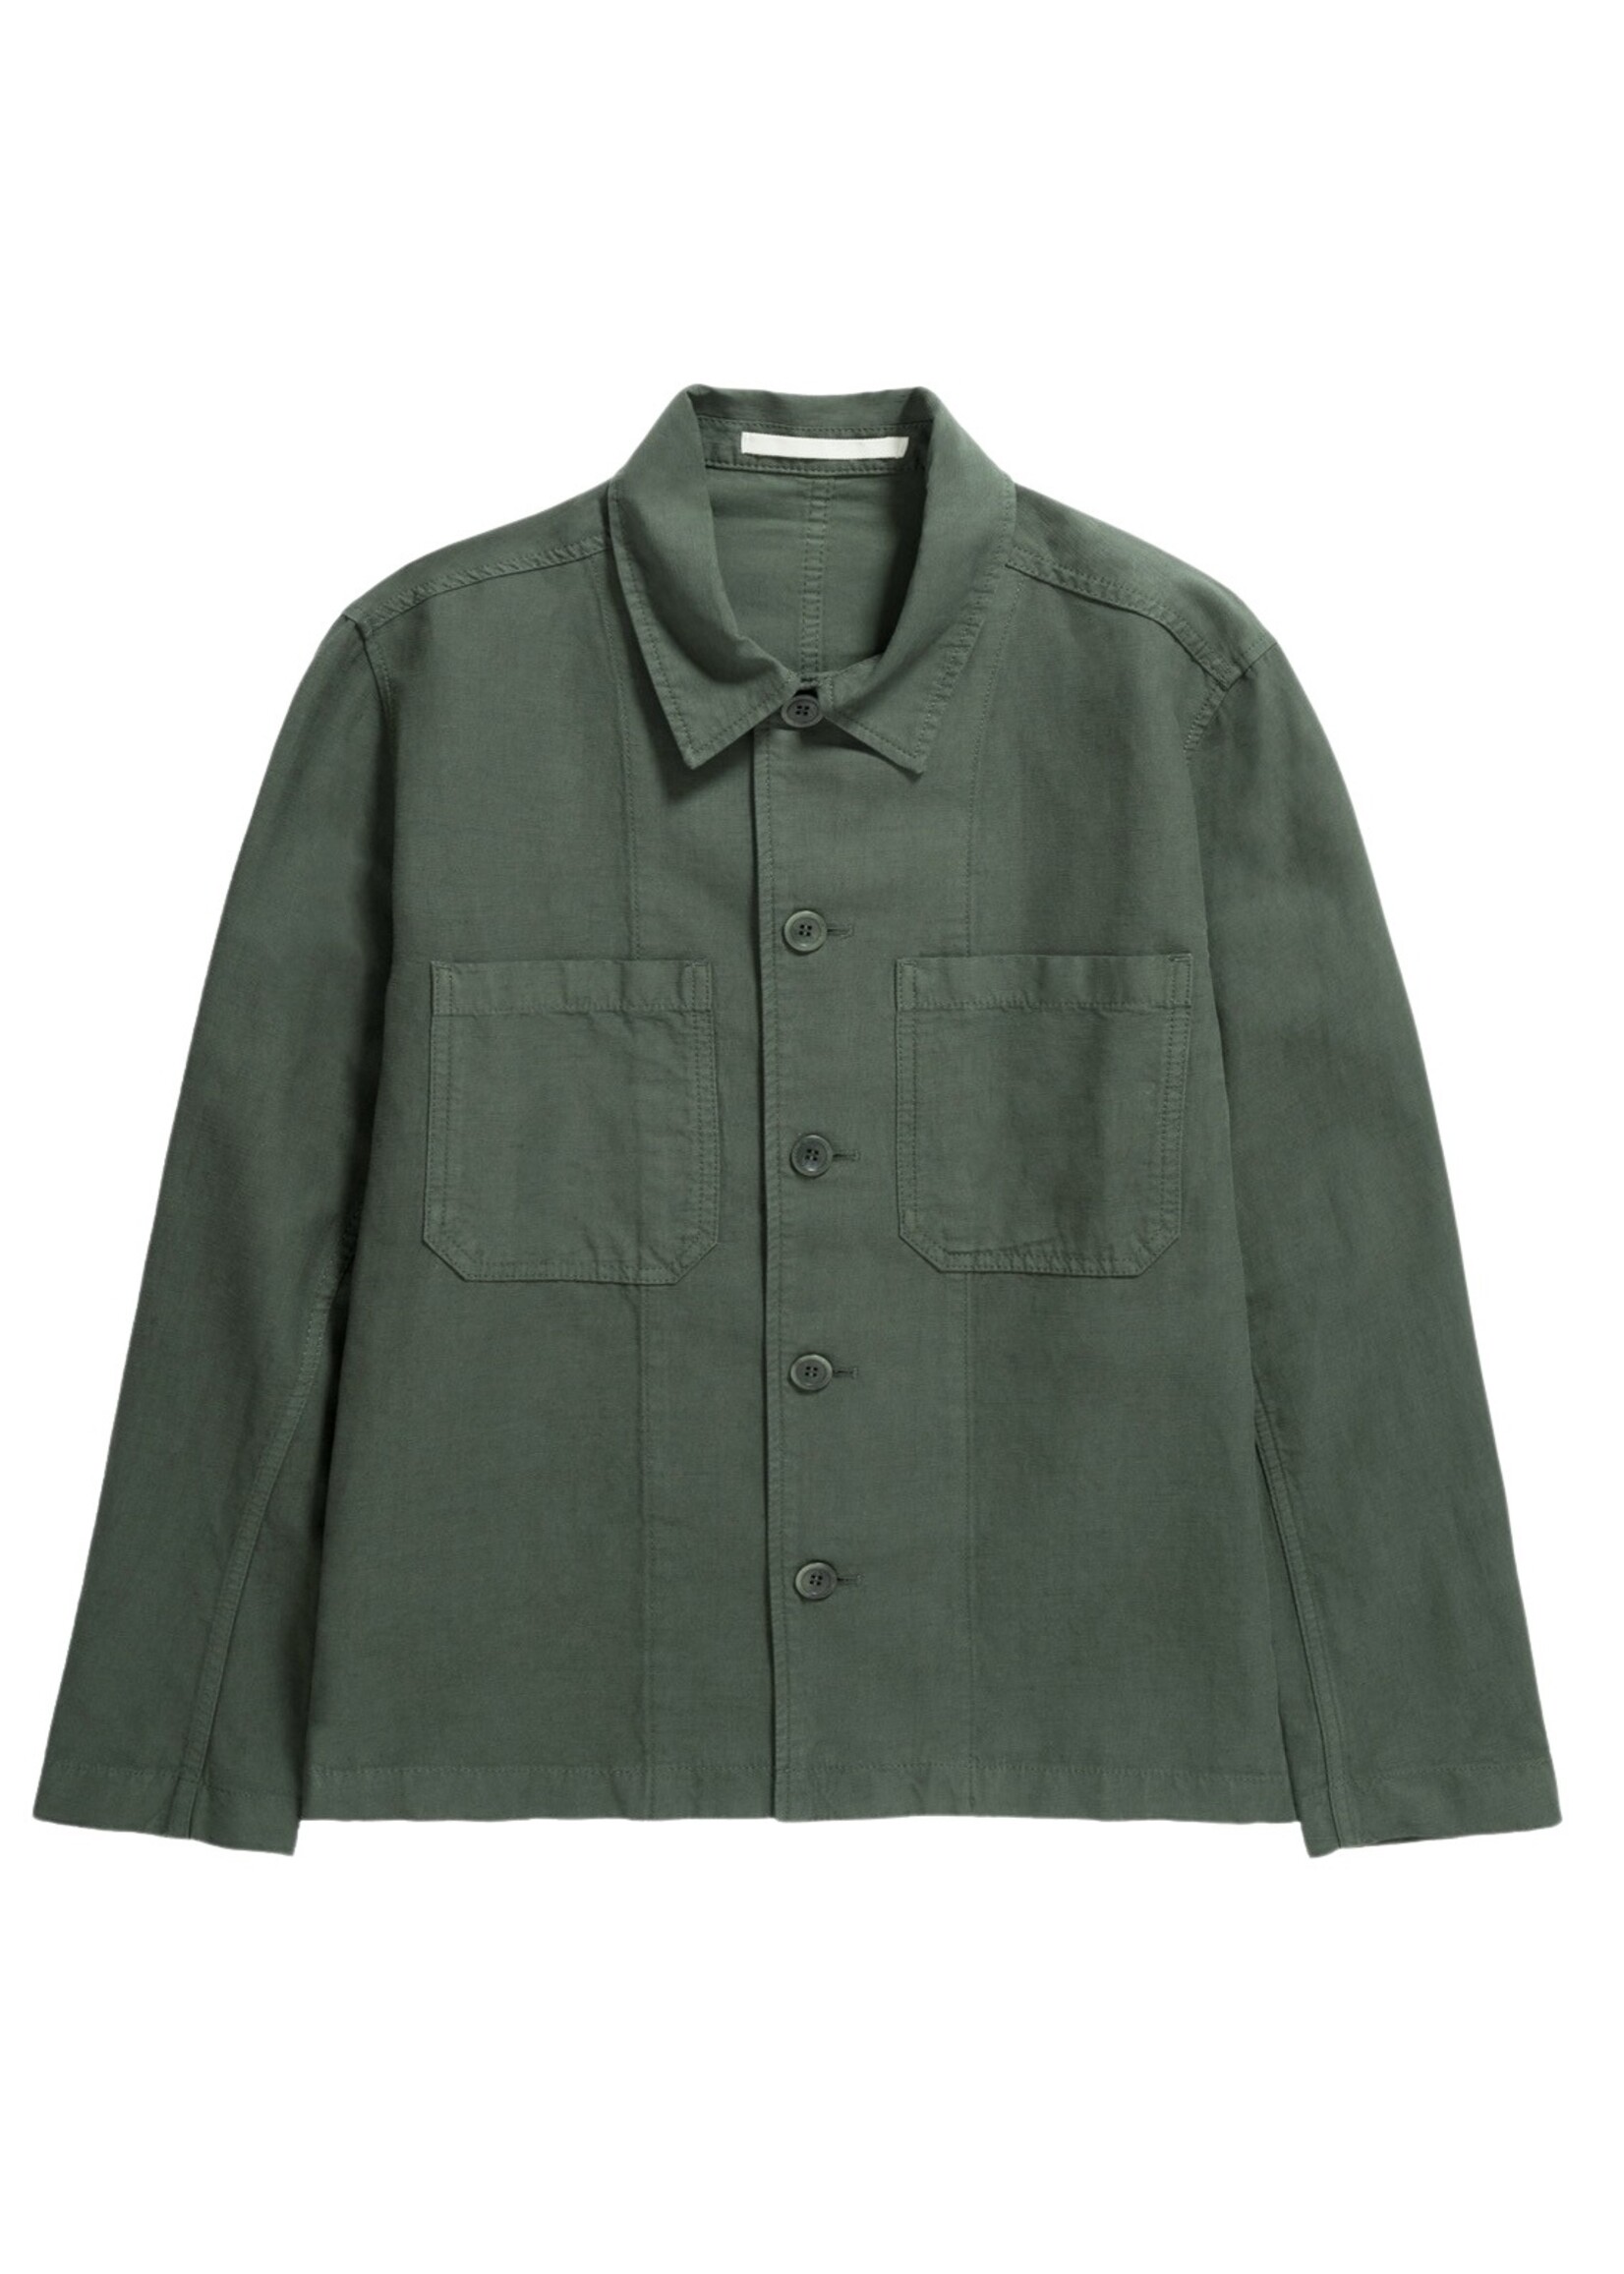 NORSE PROJECTS TYGE COTTON/LINEN OVERSHIRT